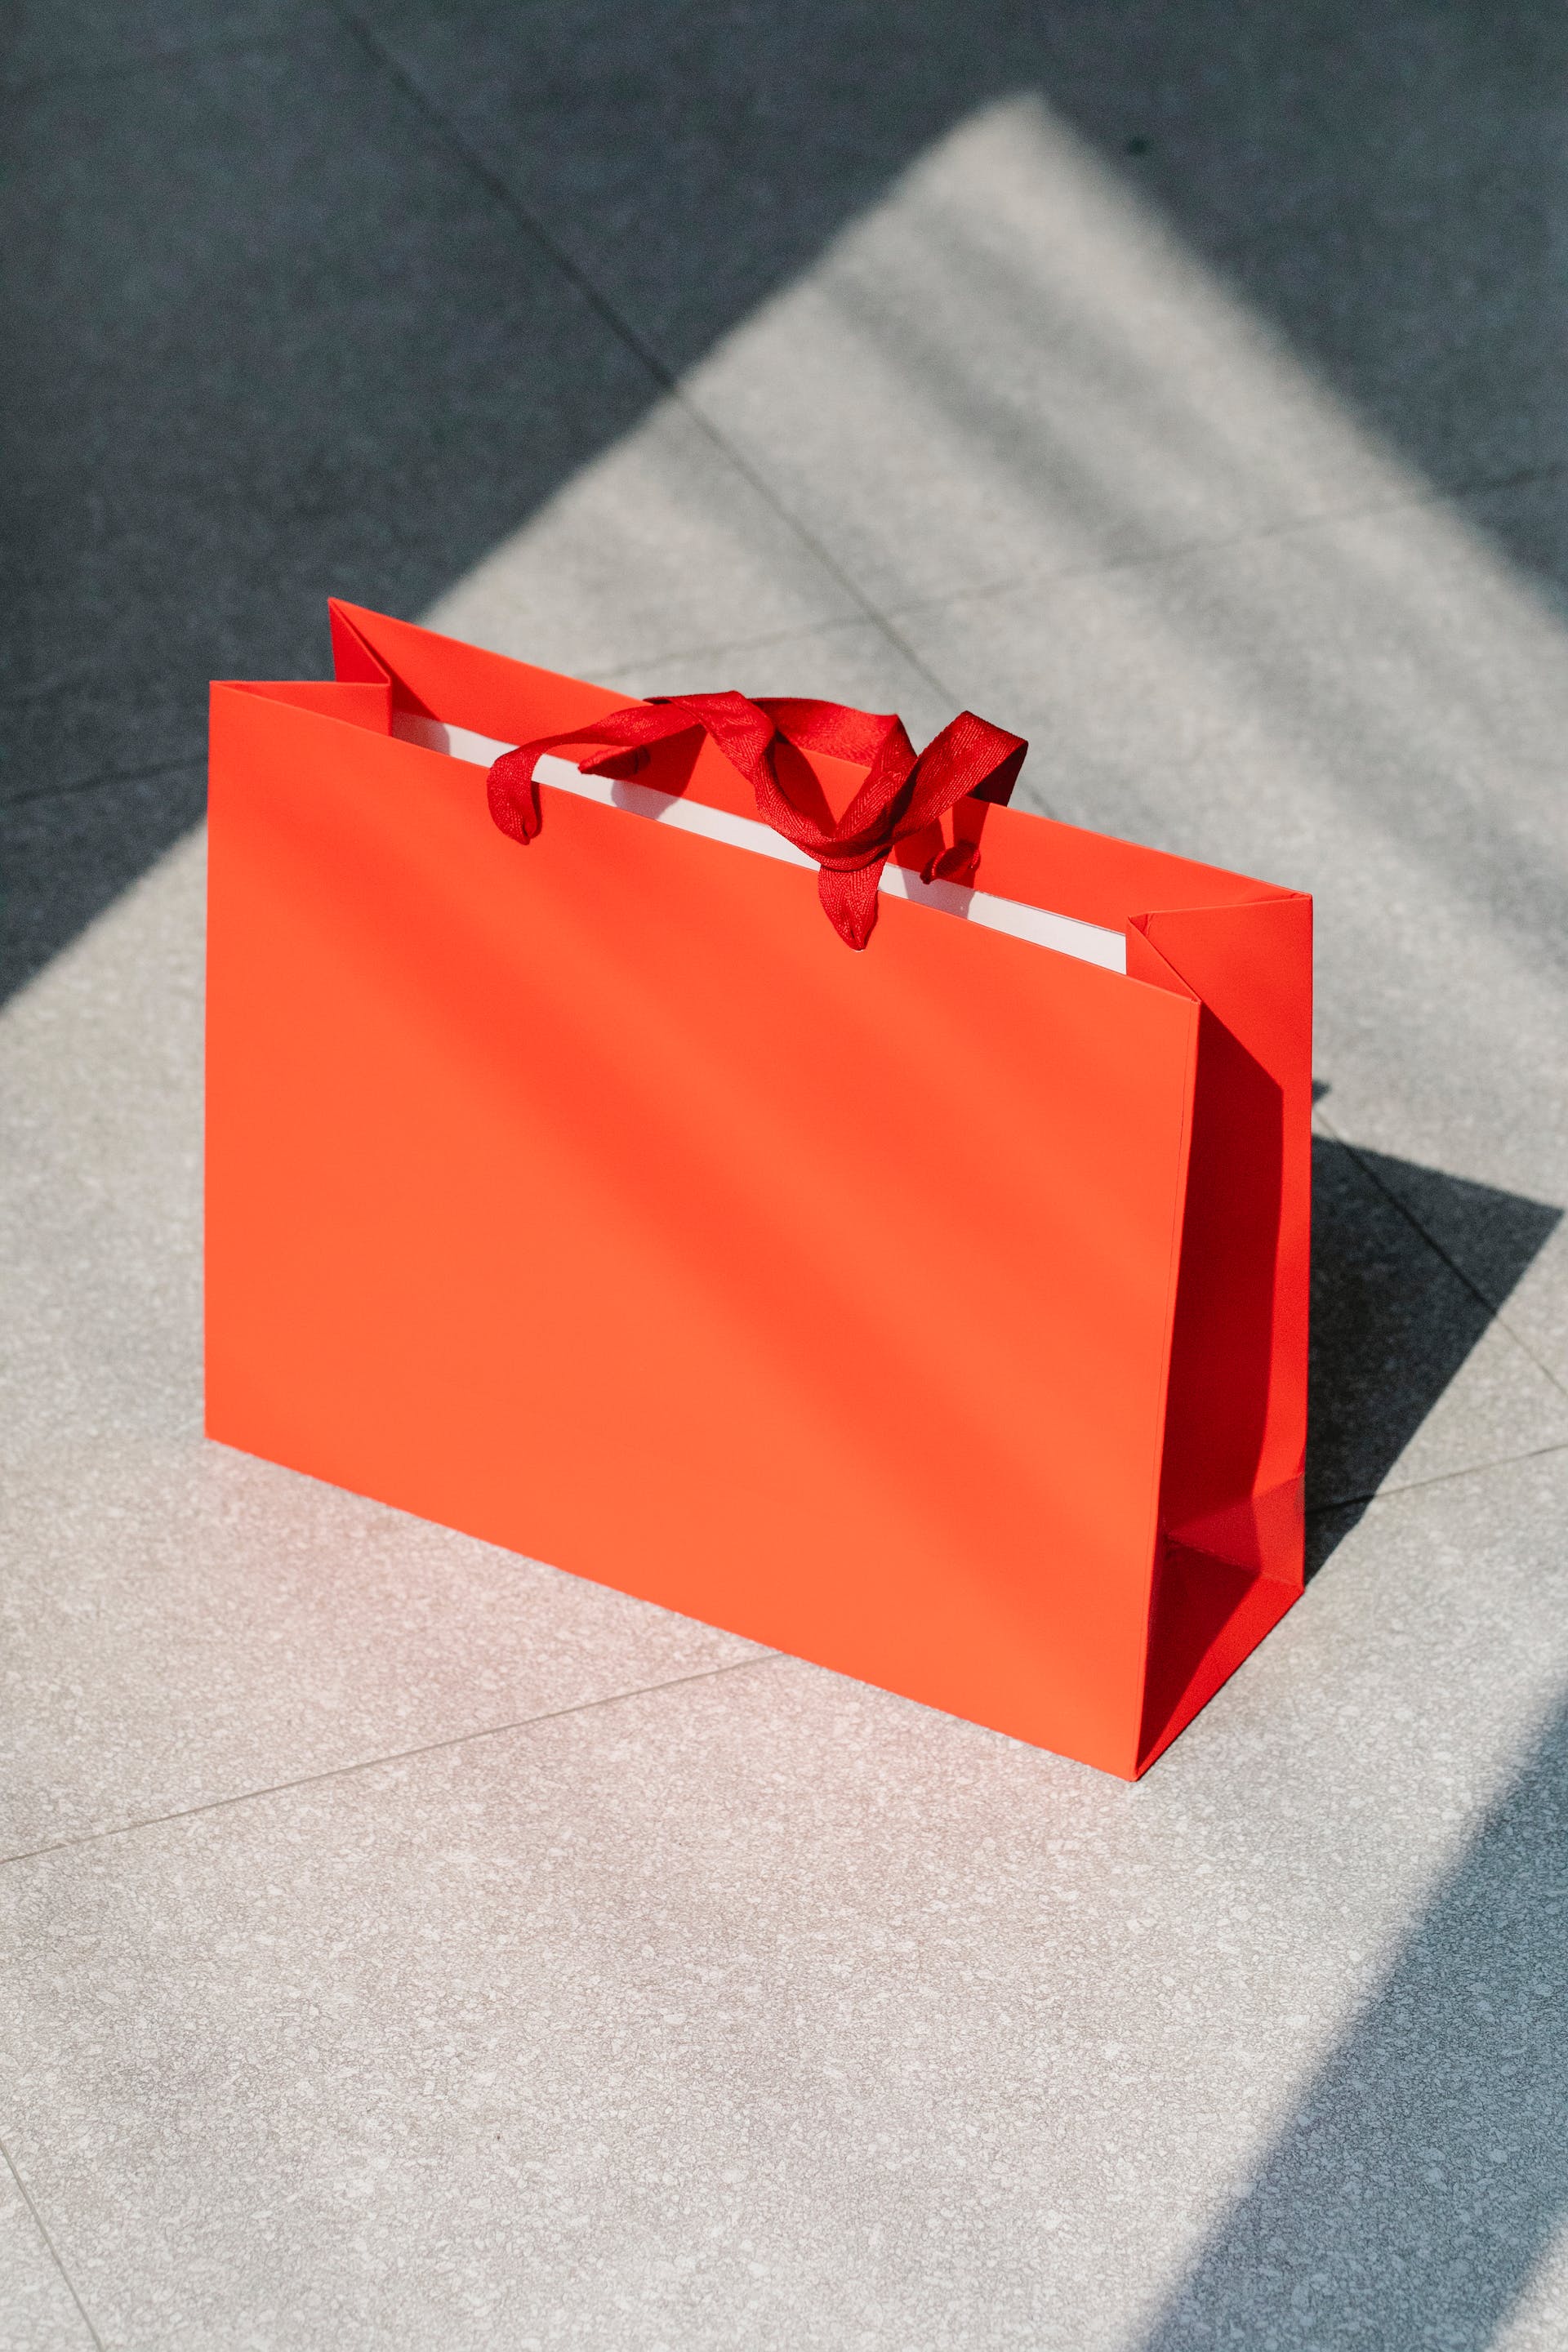 A red paperbag | Source: Pexels